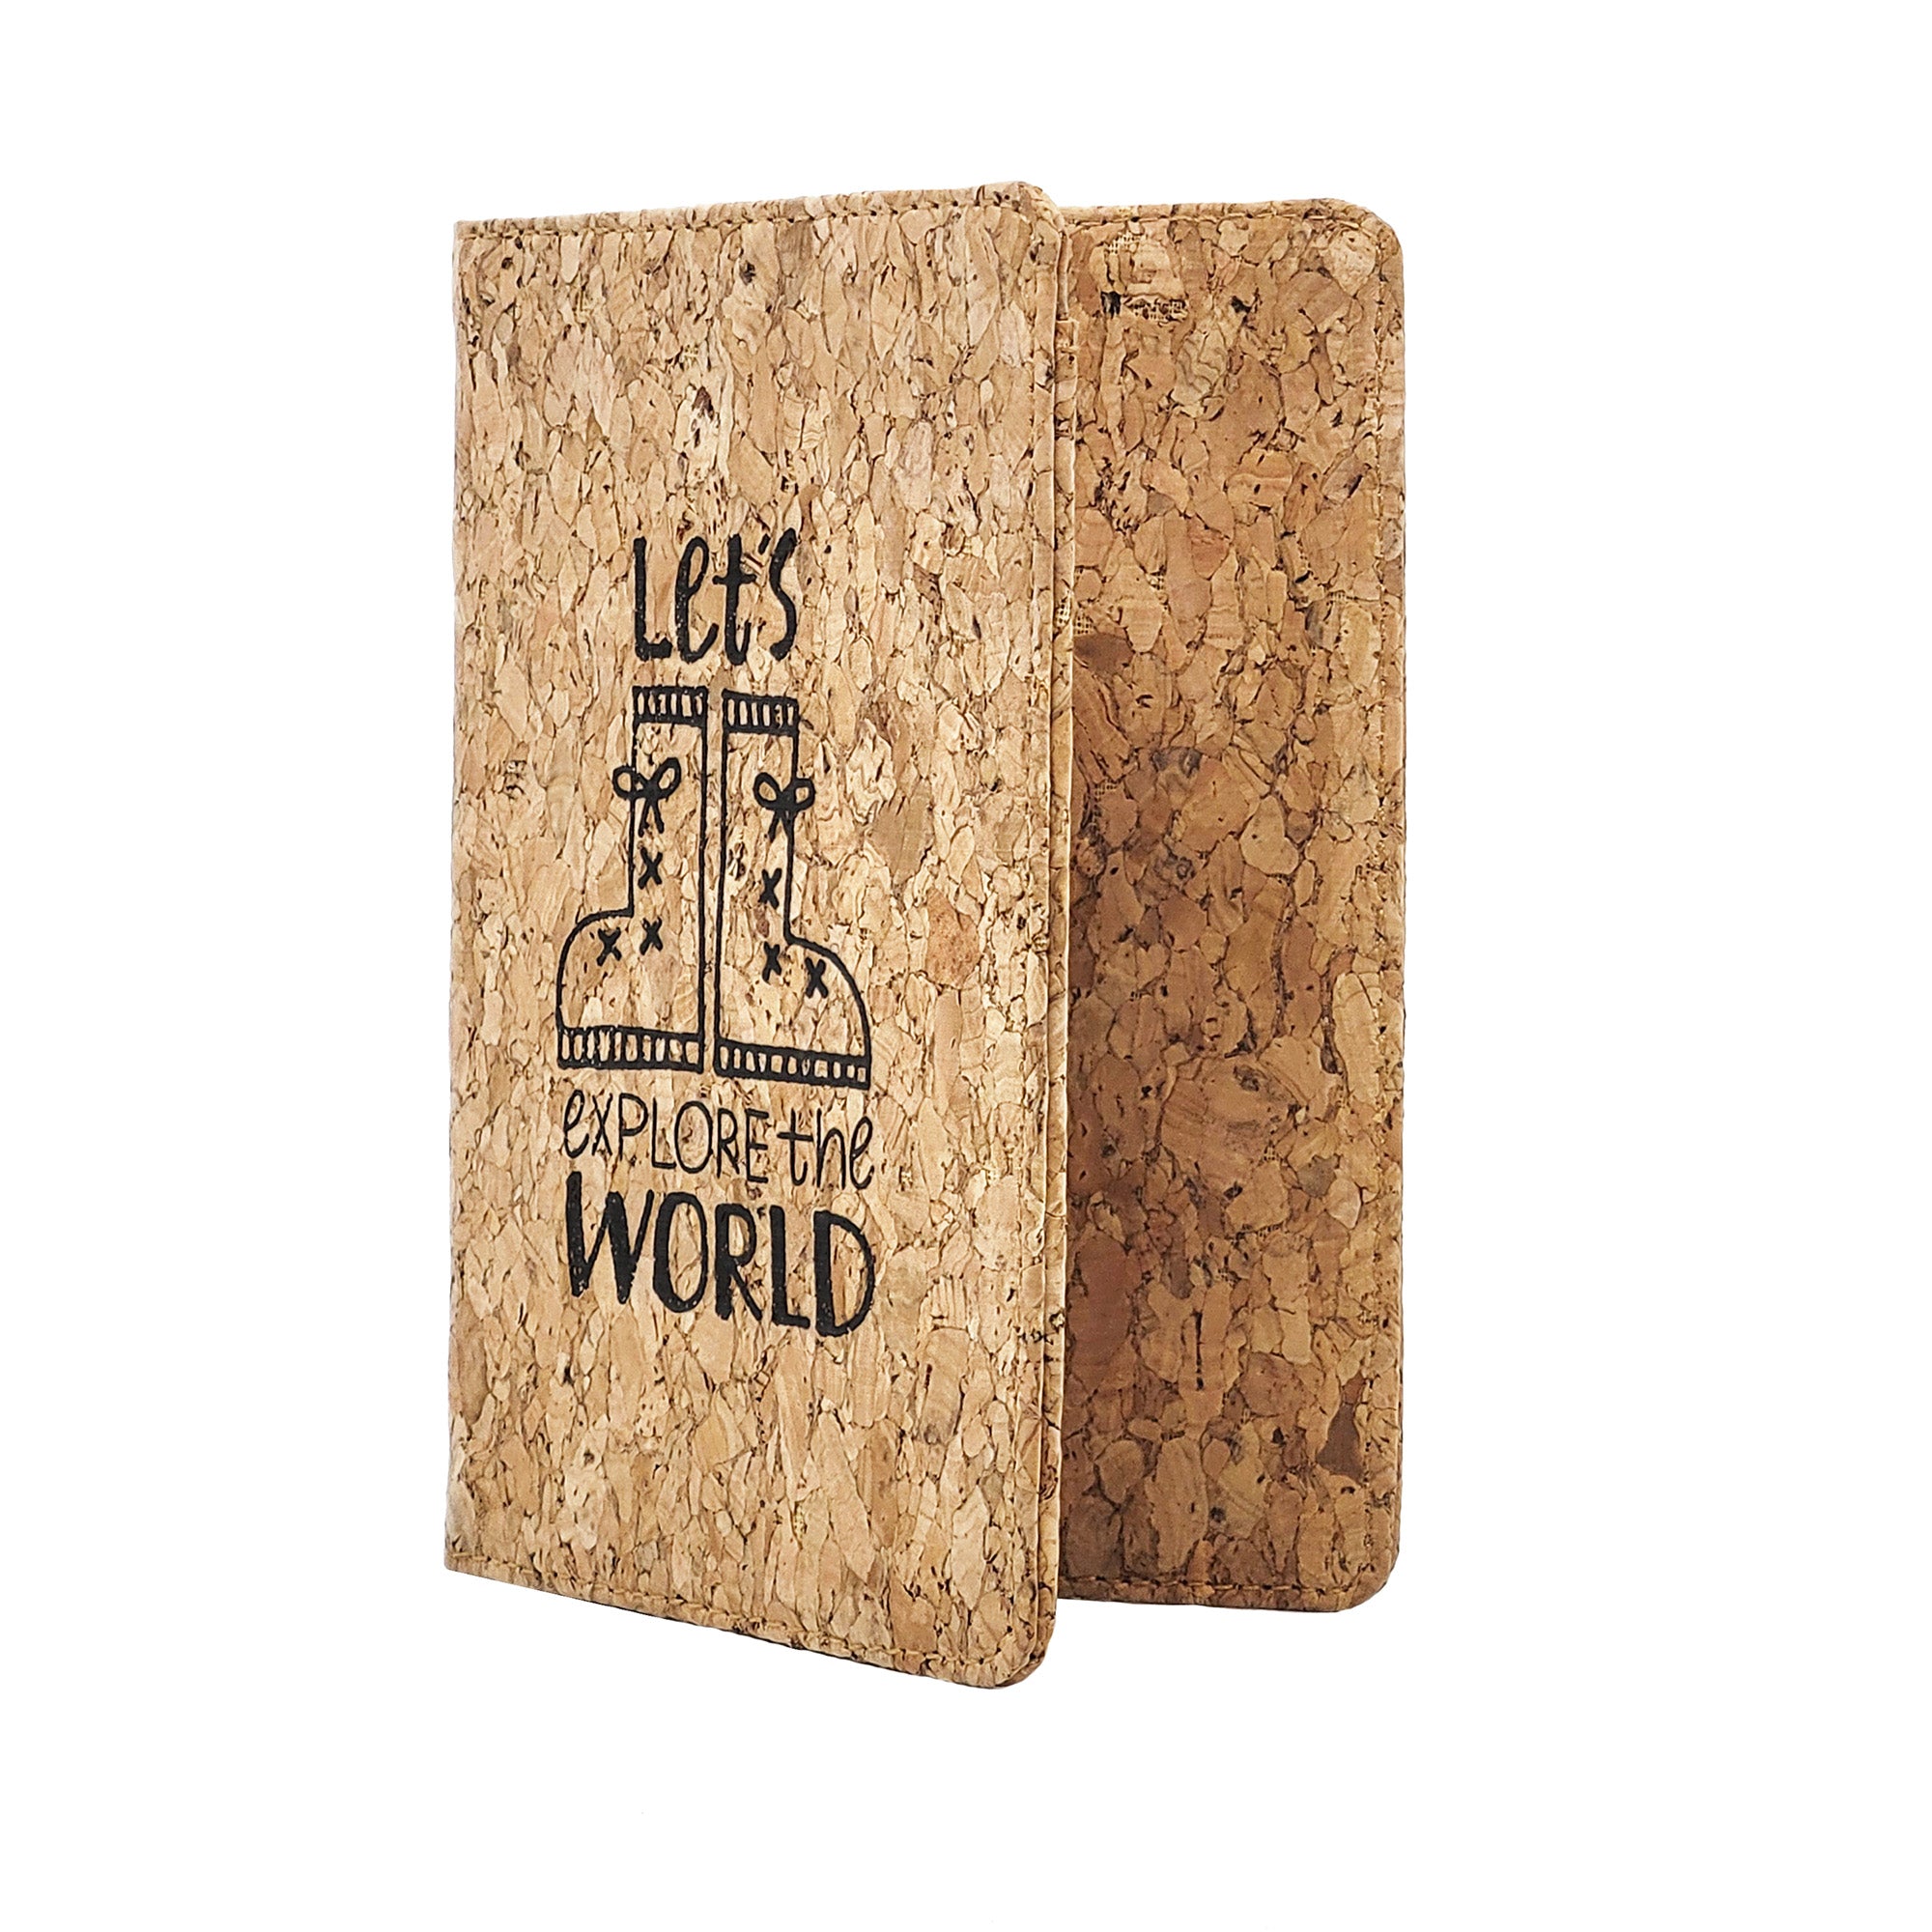 Cork leather Passport Holder-gifts for people who love to travel-sustianble gifts-green gifts